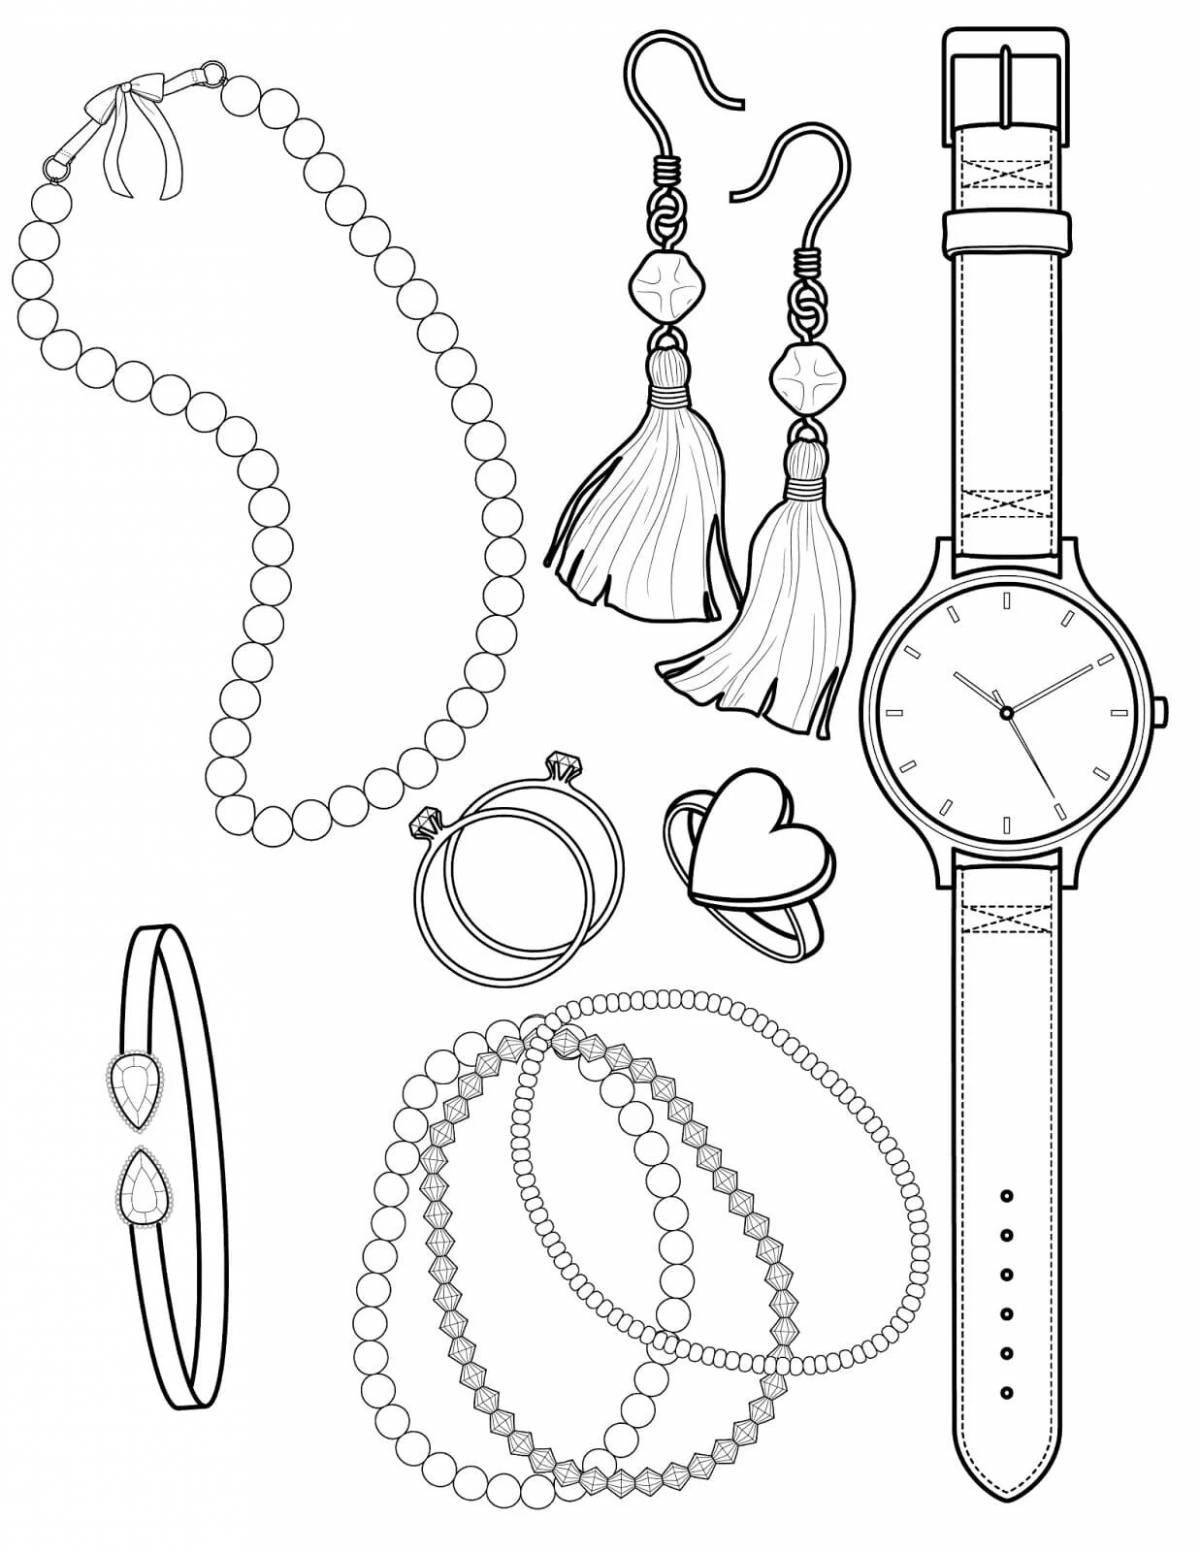 Fun accessories for coloring